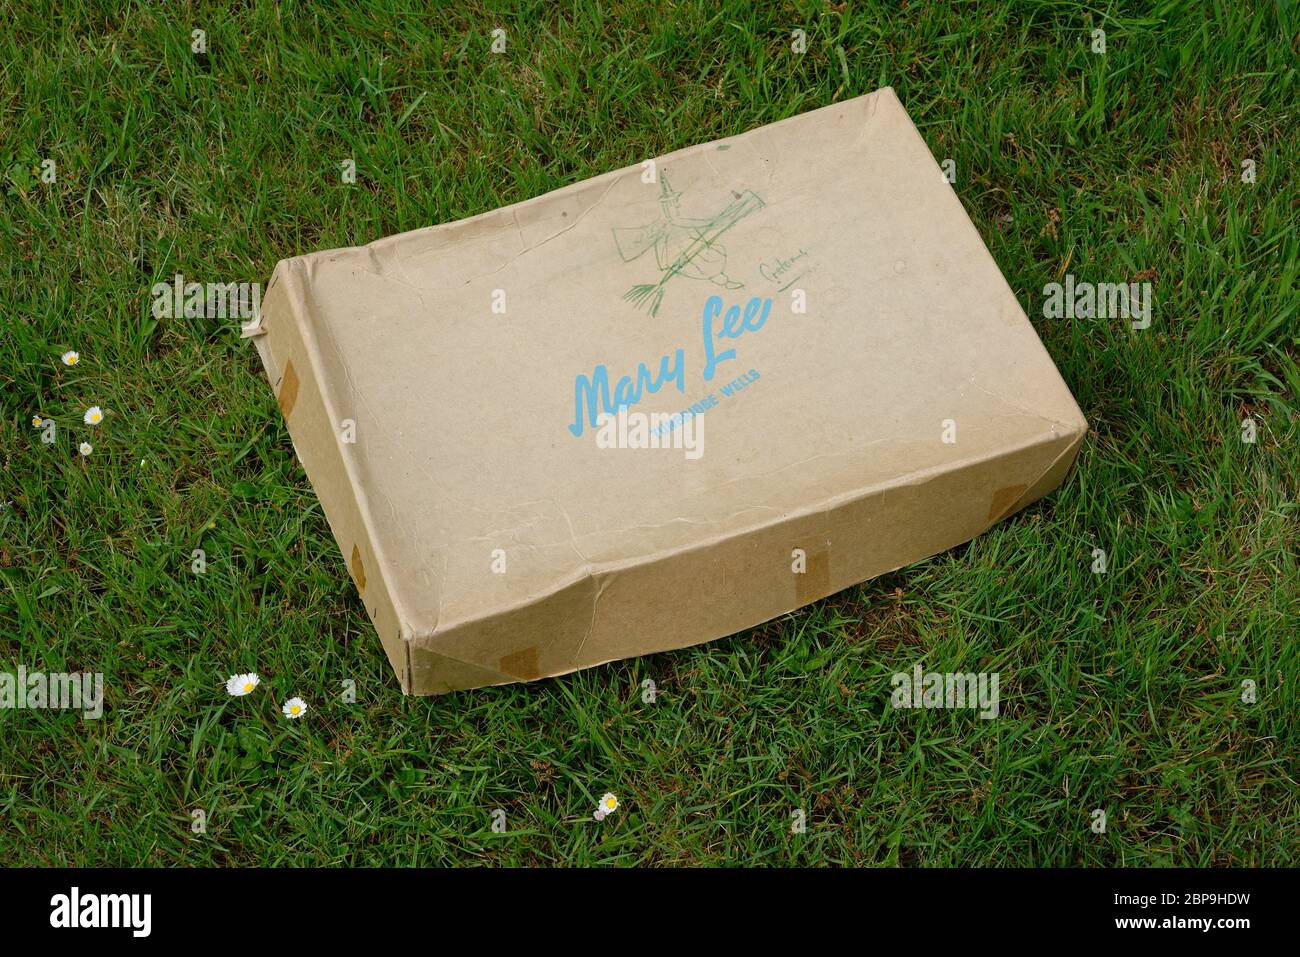 A closed old cardboard box from the 1960's from Mary Lee a department store in Tunbridge Wells, Kent, UK. Stock Photo